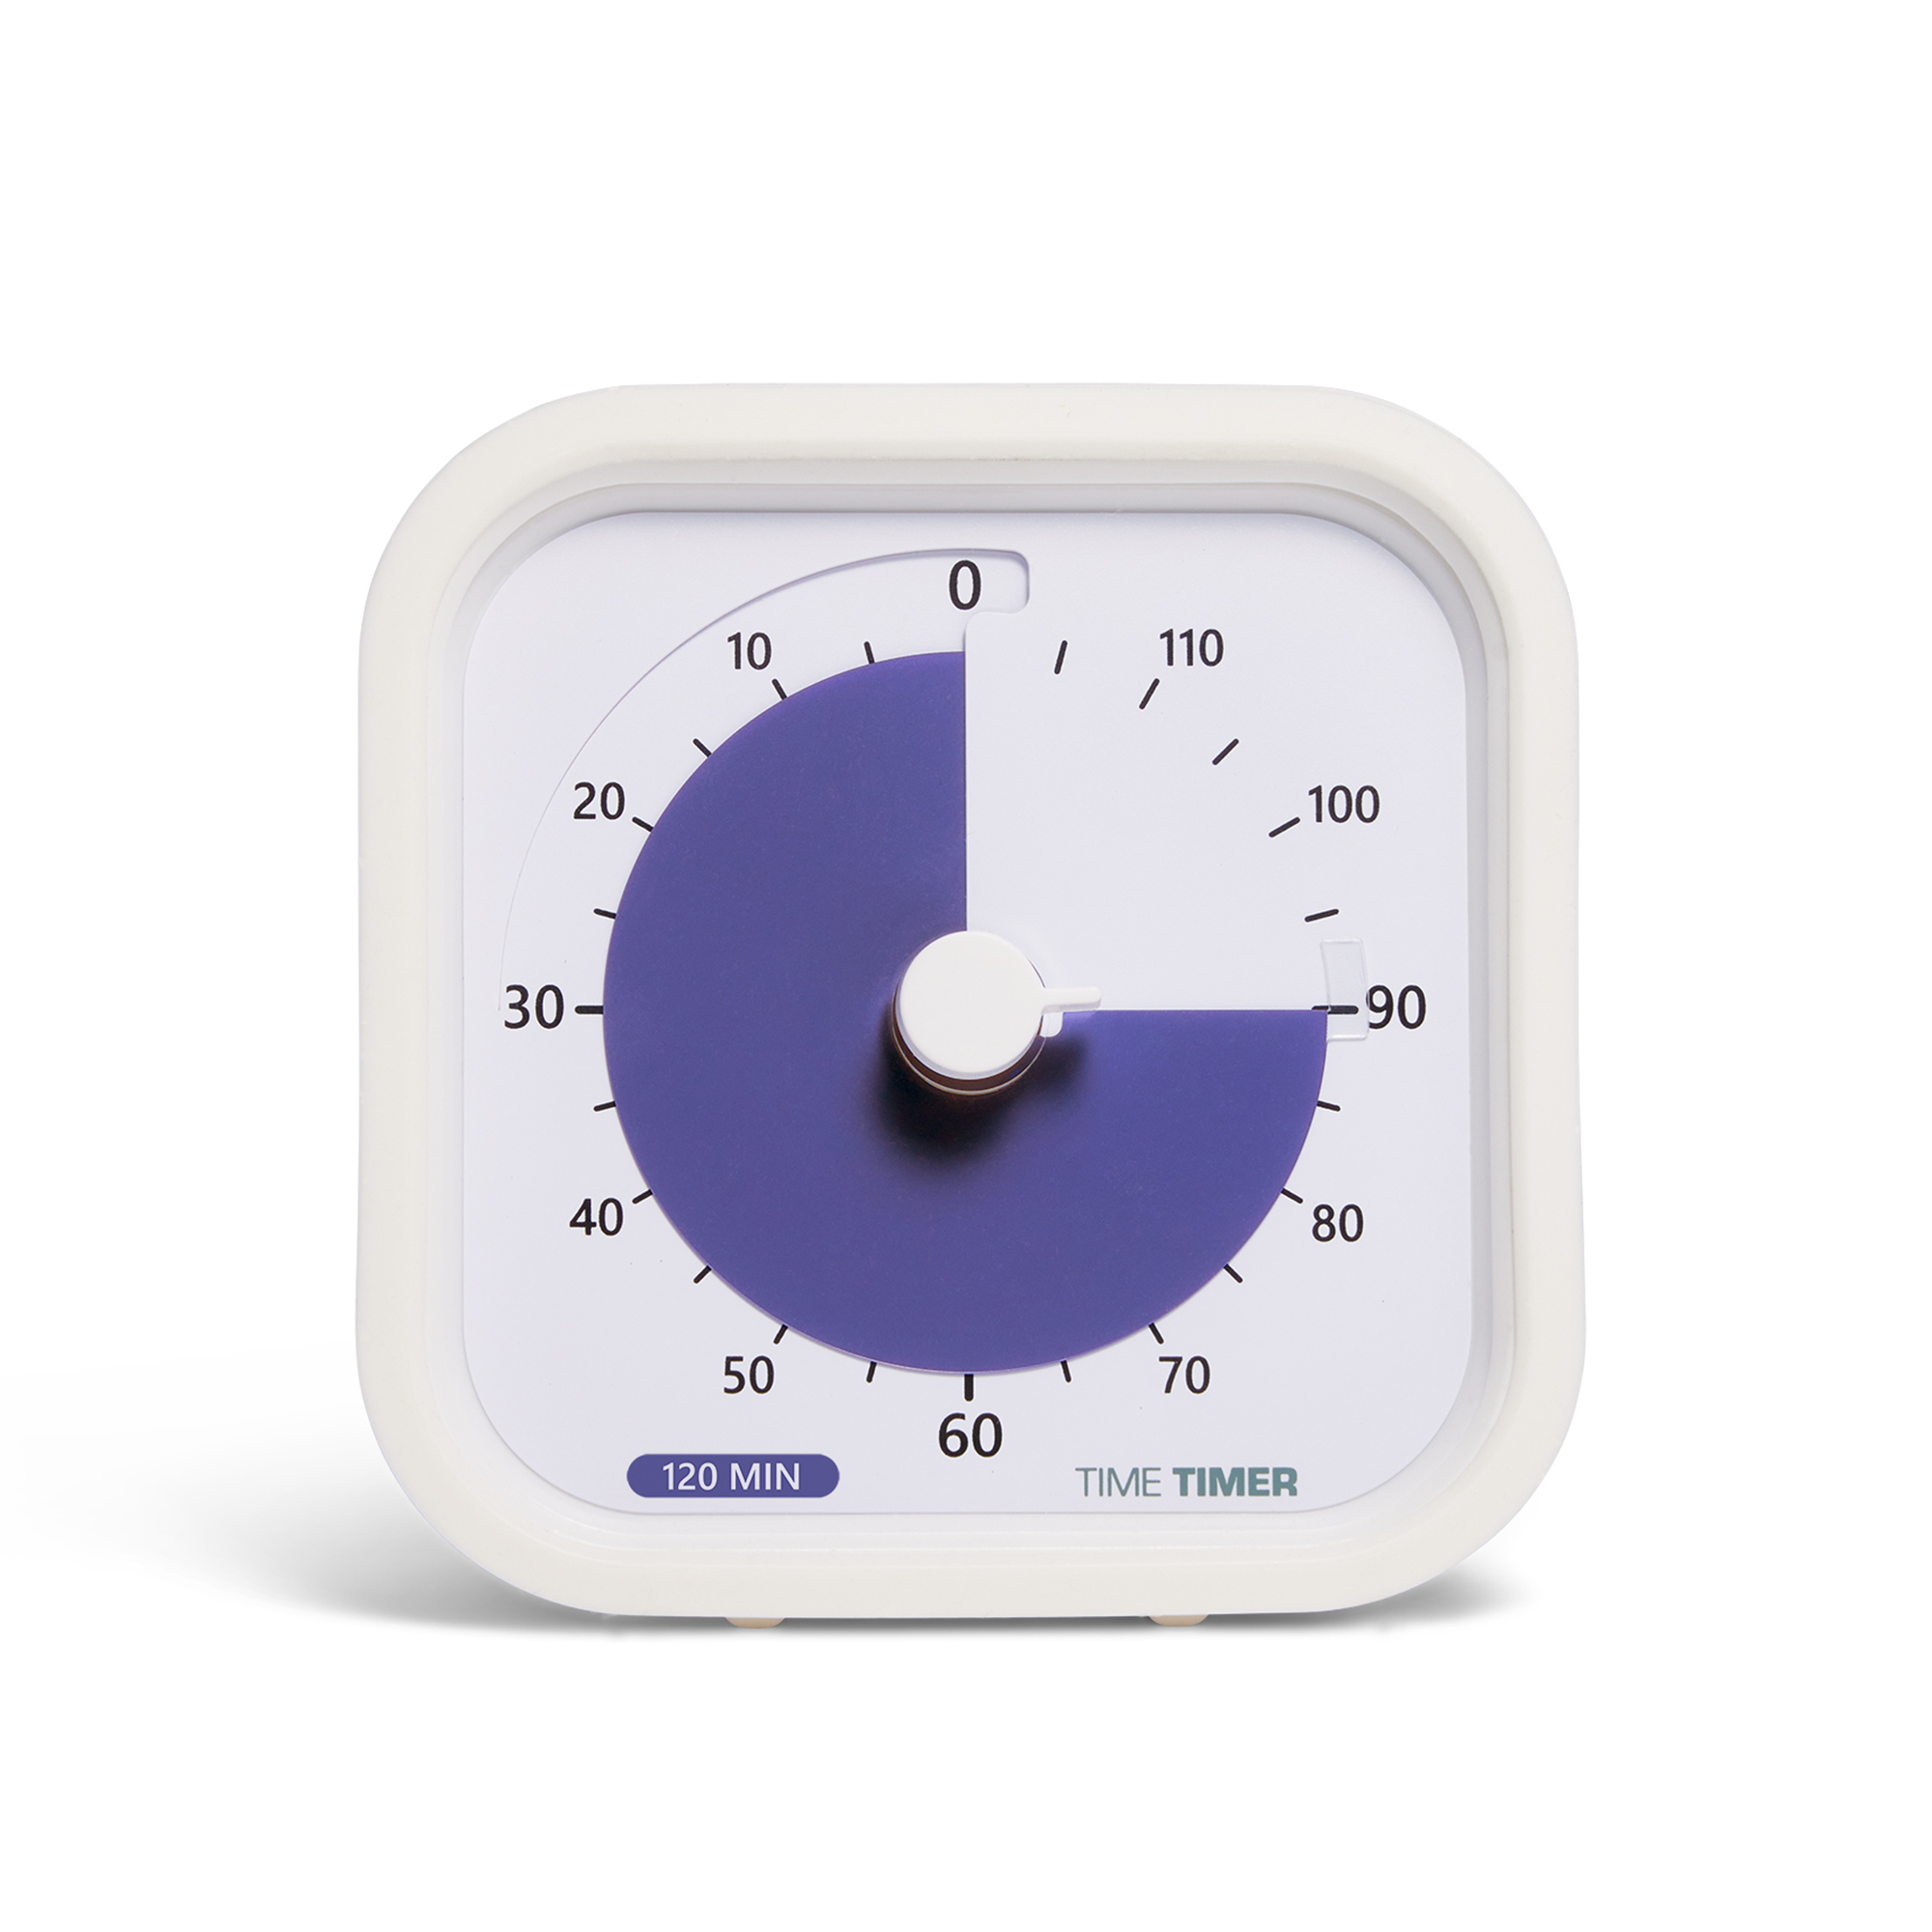 The Time Timer MOD 120-Minute visual timer is shown straight on. The purple disappearing disk is set at the 90 minute mark. 